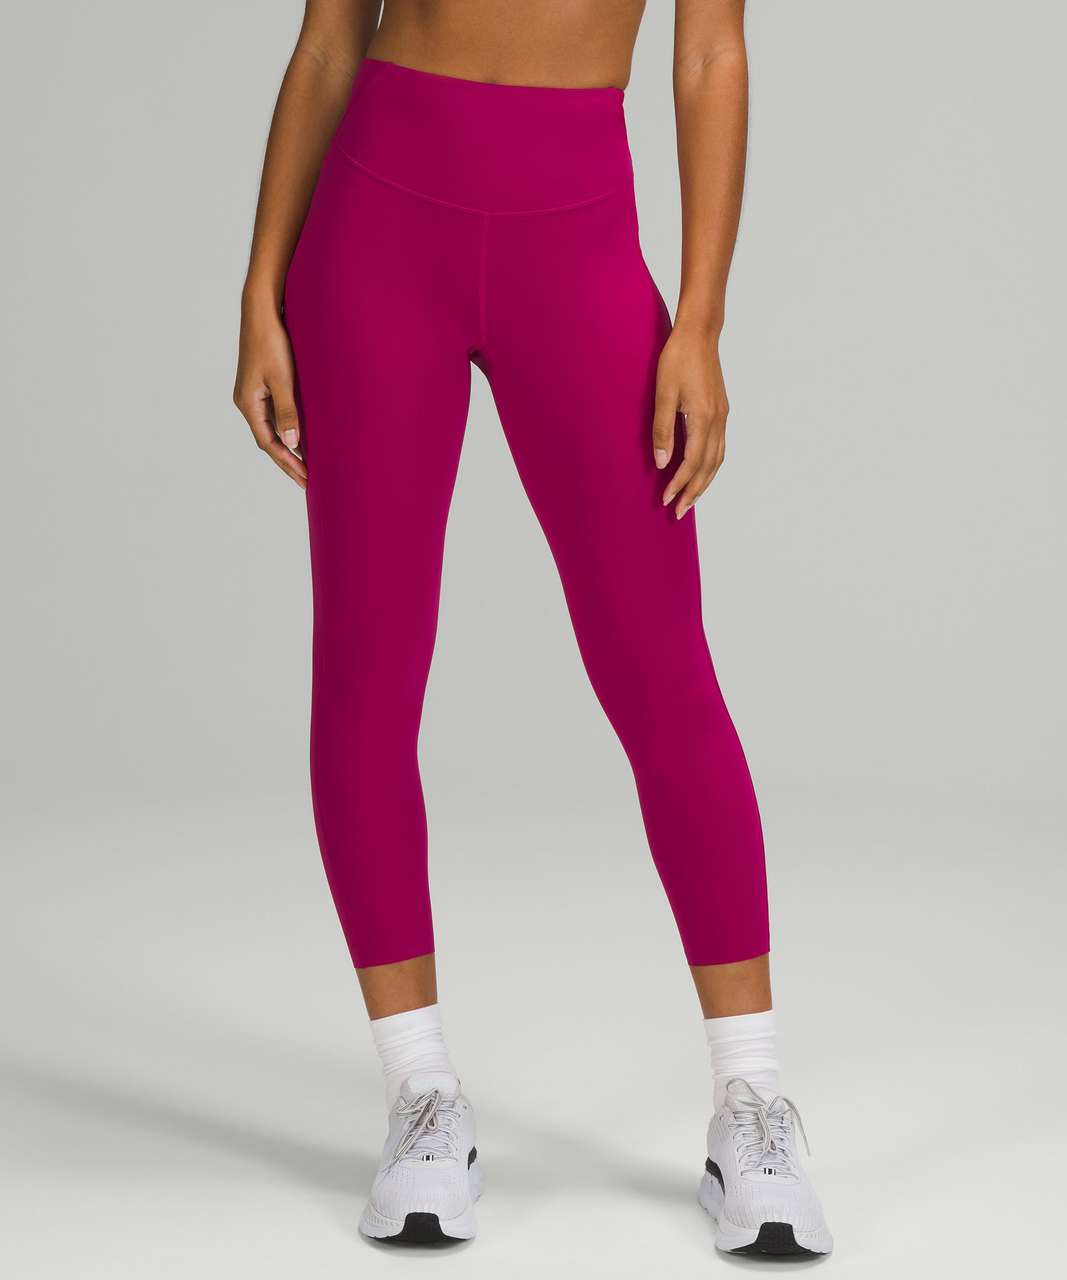 NWT Lululemon Base Pace High Rise Tight 28” FLEECE Wild Berry Pink